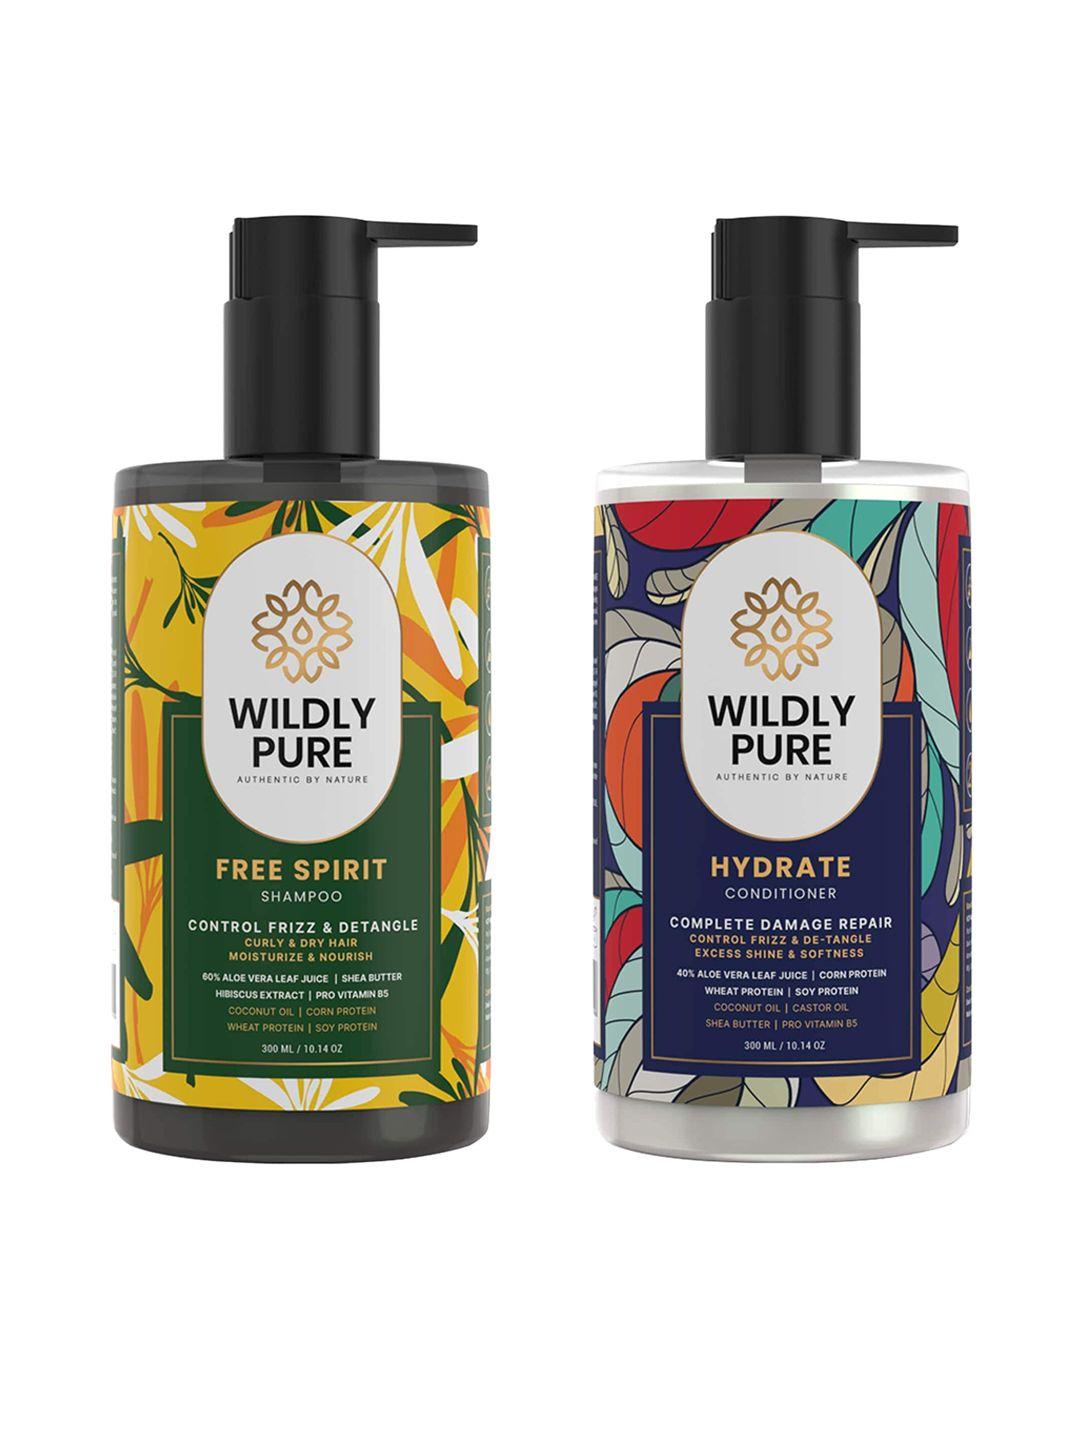 wildly pure set of 2 curl definition shampoo & conditioner 300ml each